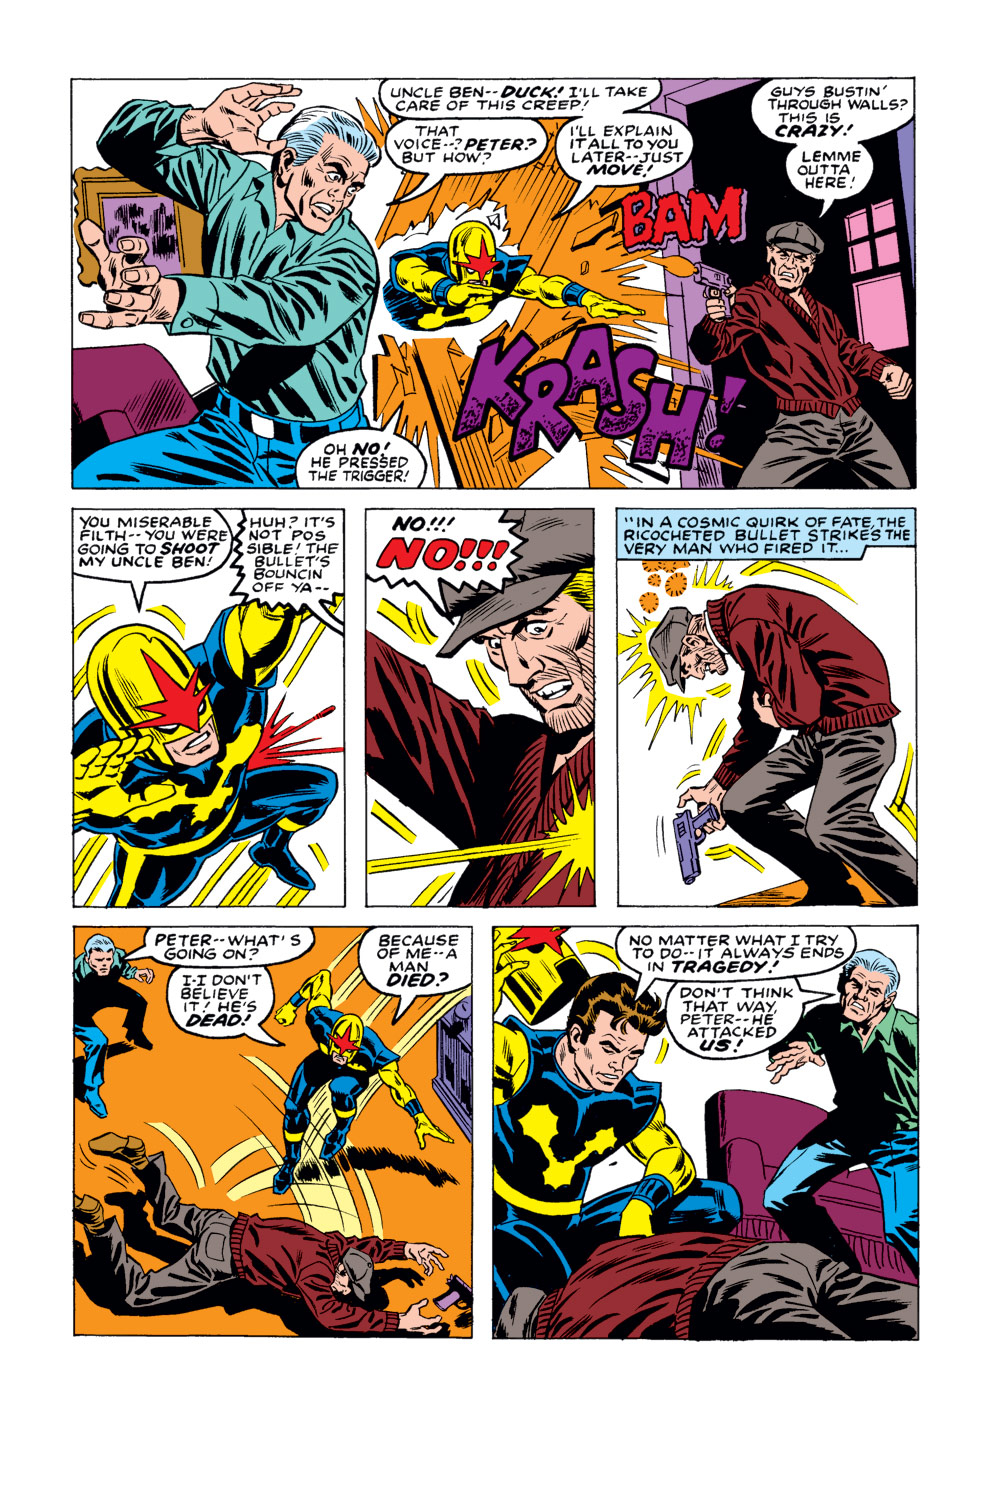 What If? (1977) issue 15 - Nova had been four other people - Page 26